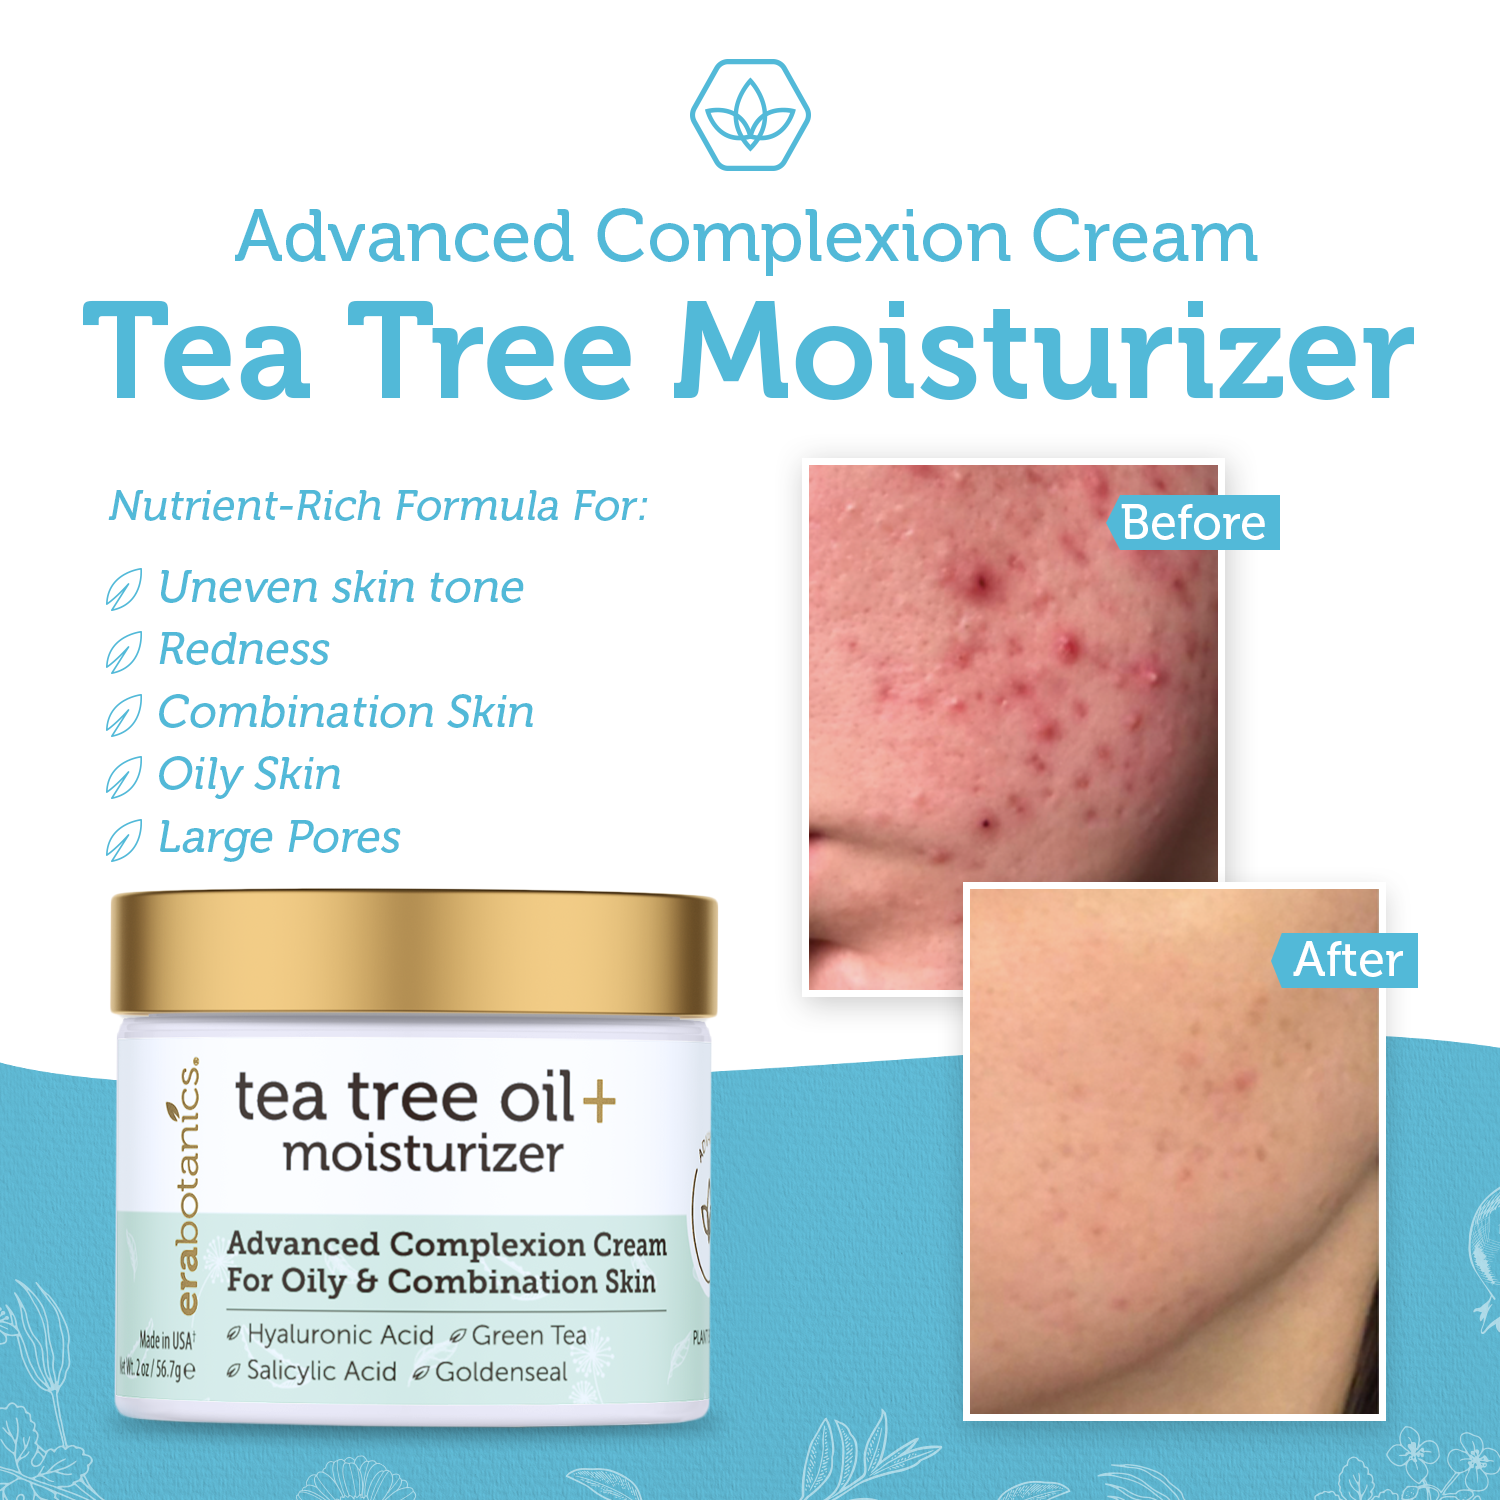 Era Organics Tea Tree Oil Face Cream - For Oily, Acne Prone Skin, Extra Soothing & Nourishing Non-Greasy Botanical Facial Moisturizer with 7X Ingredients For Rosacea, Cystic Acne, Blackheads & Redness - image 5 of 6